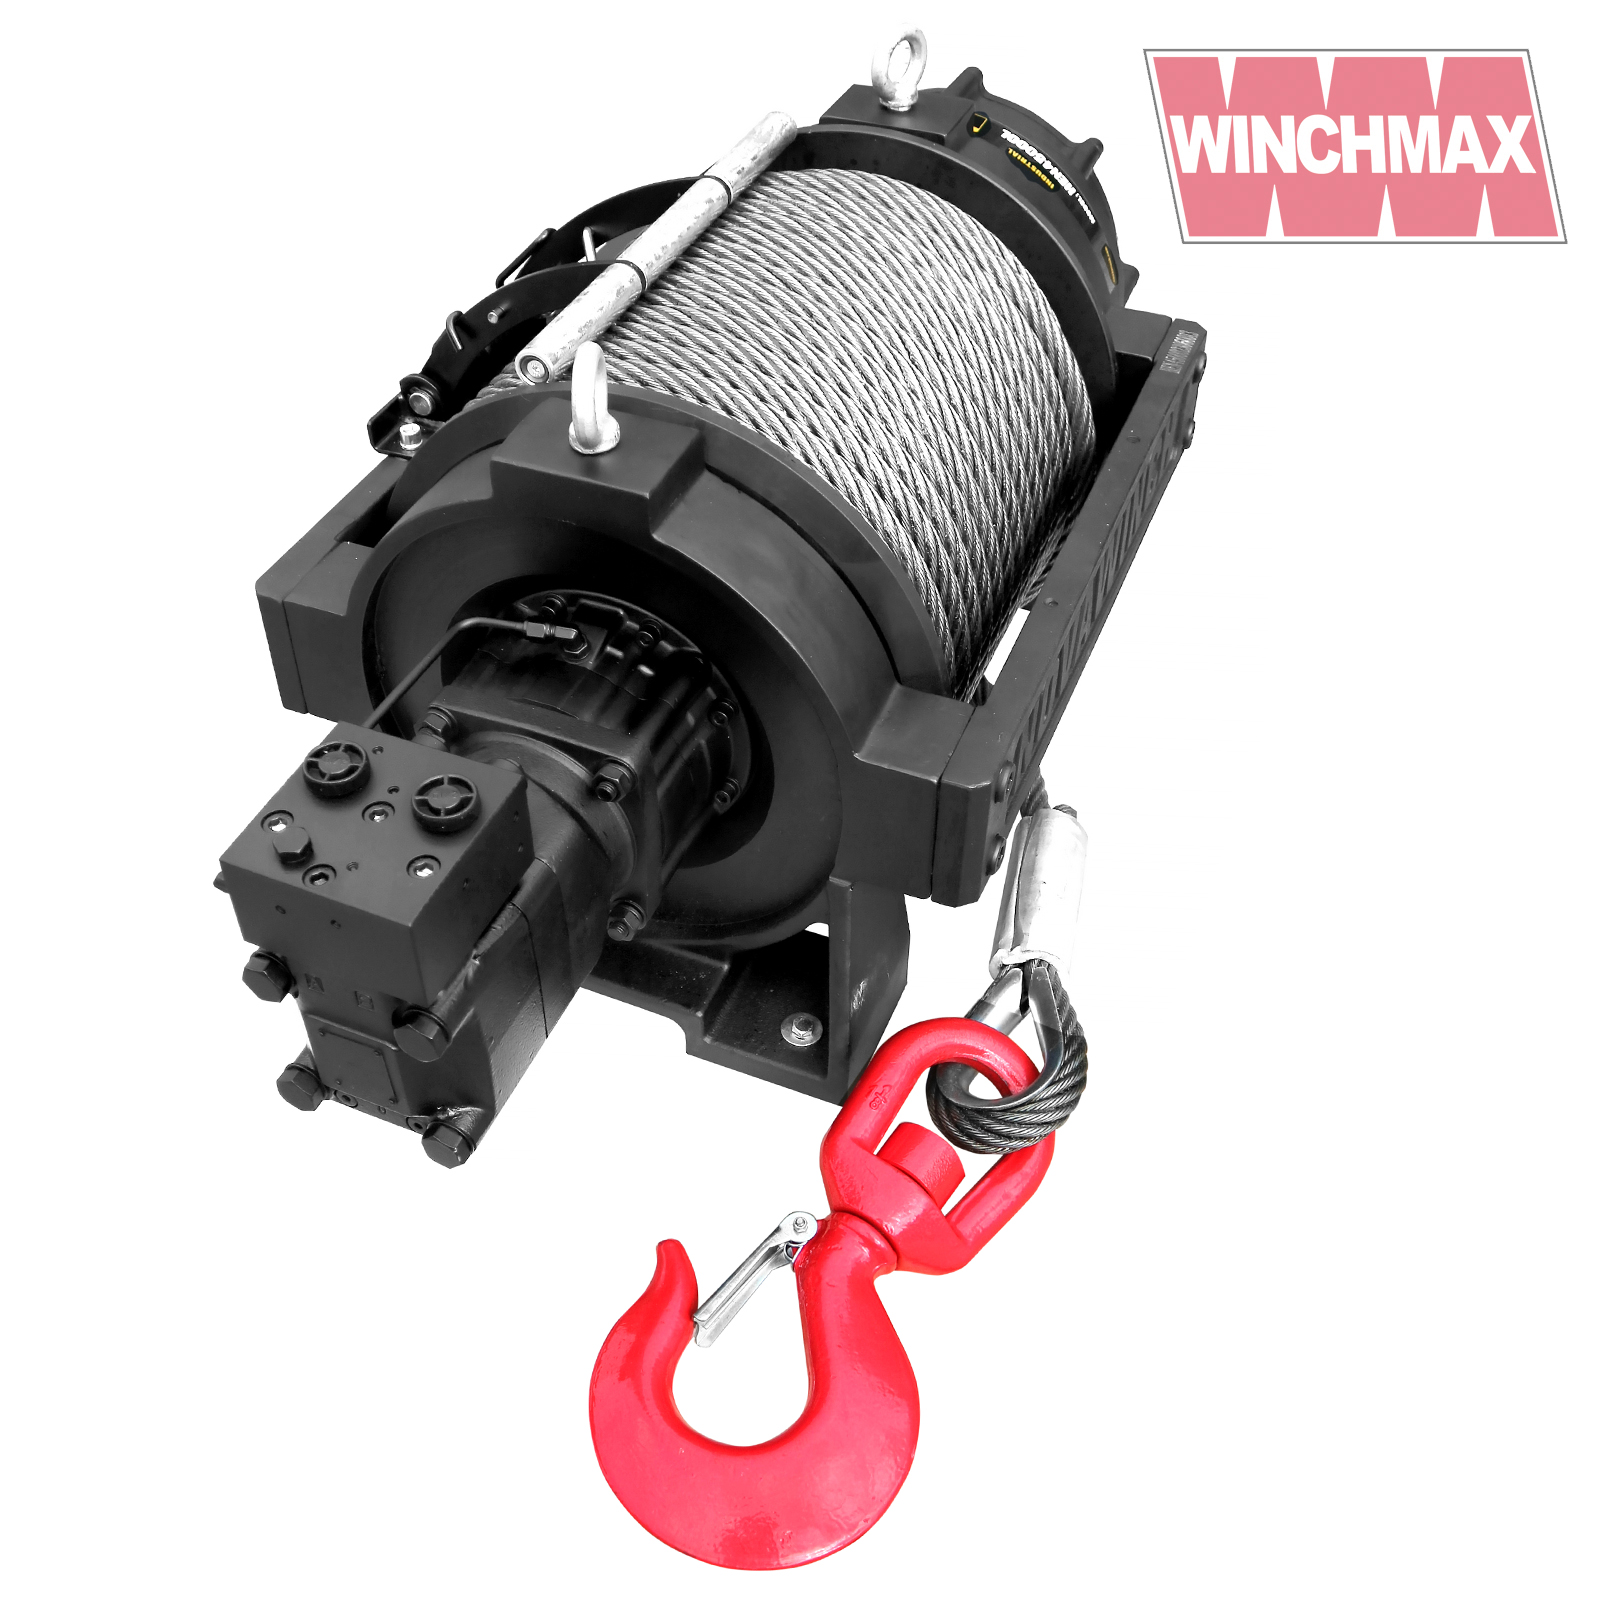 45,000lb (20,411kg) Hydraulic Recovery Winch, HGV/Industrial/Commercial,  Long Drum, Steel Rope & Swivel Hook. - Winchmax